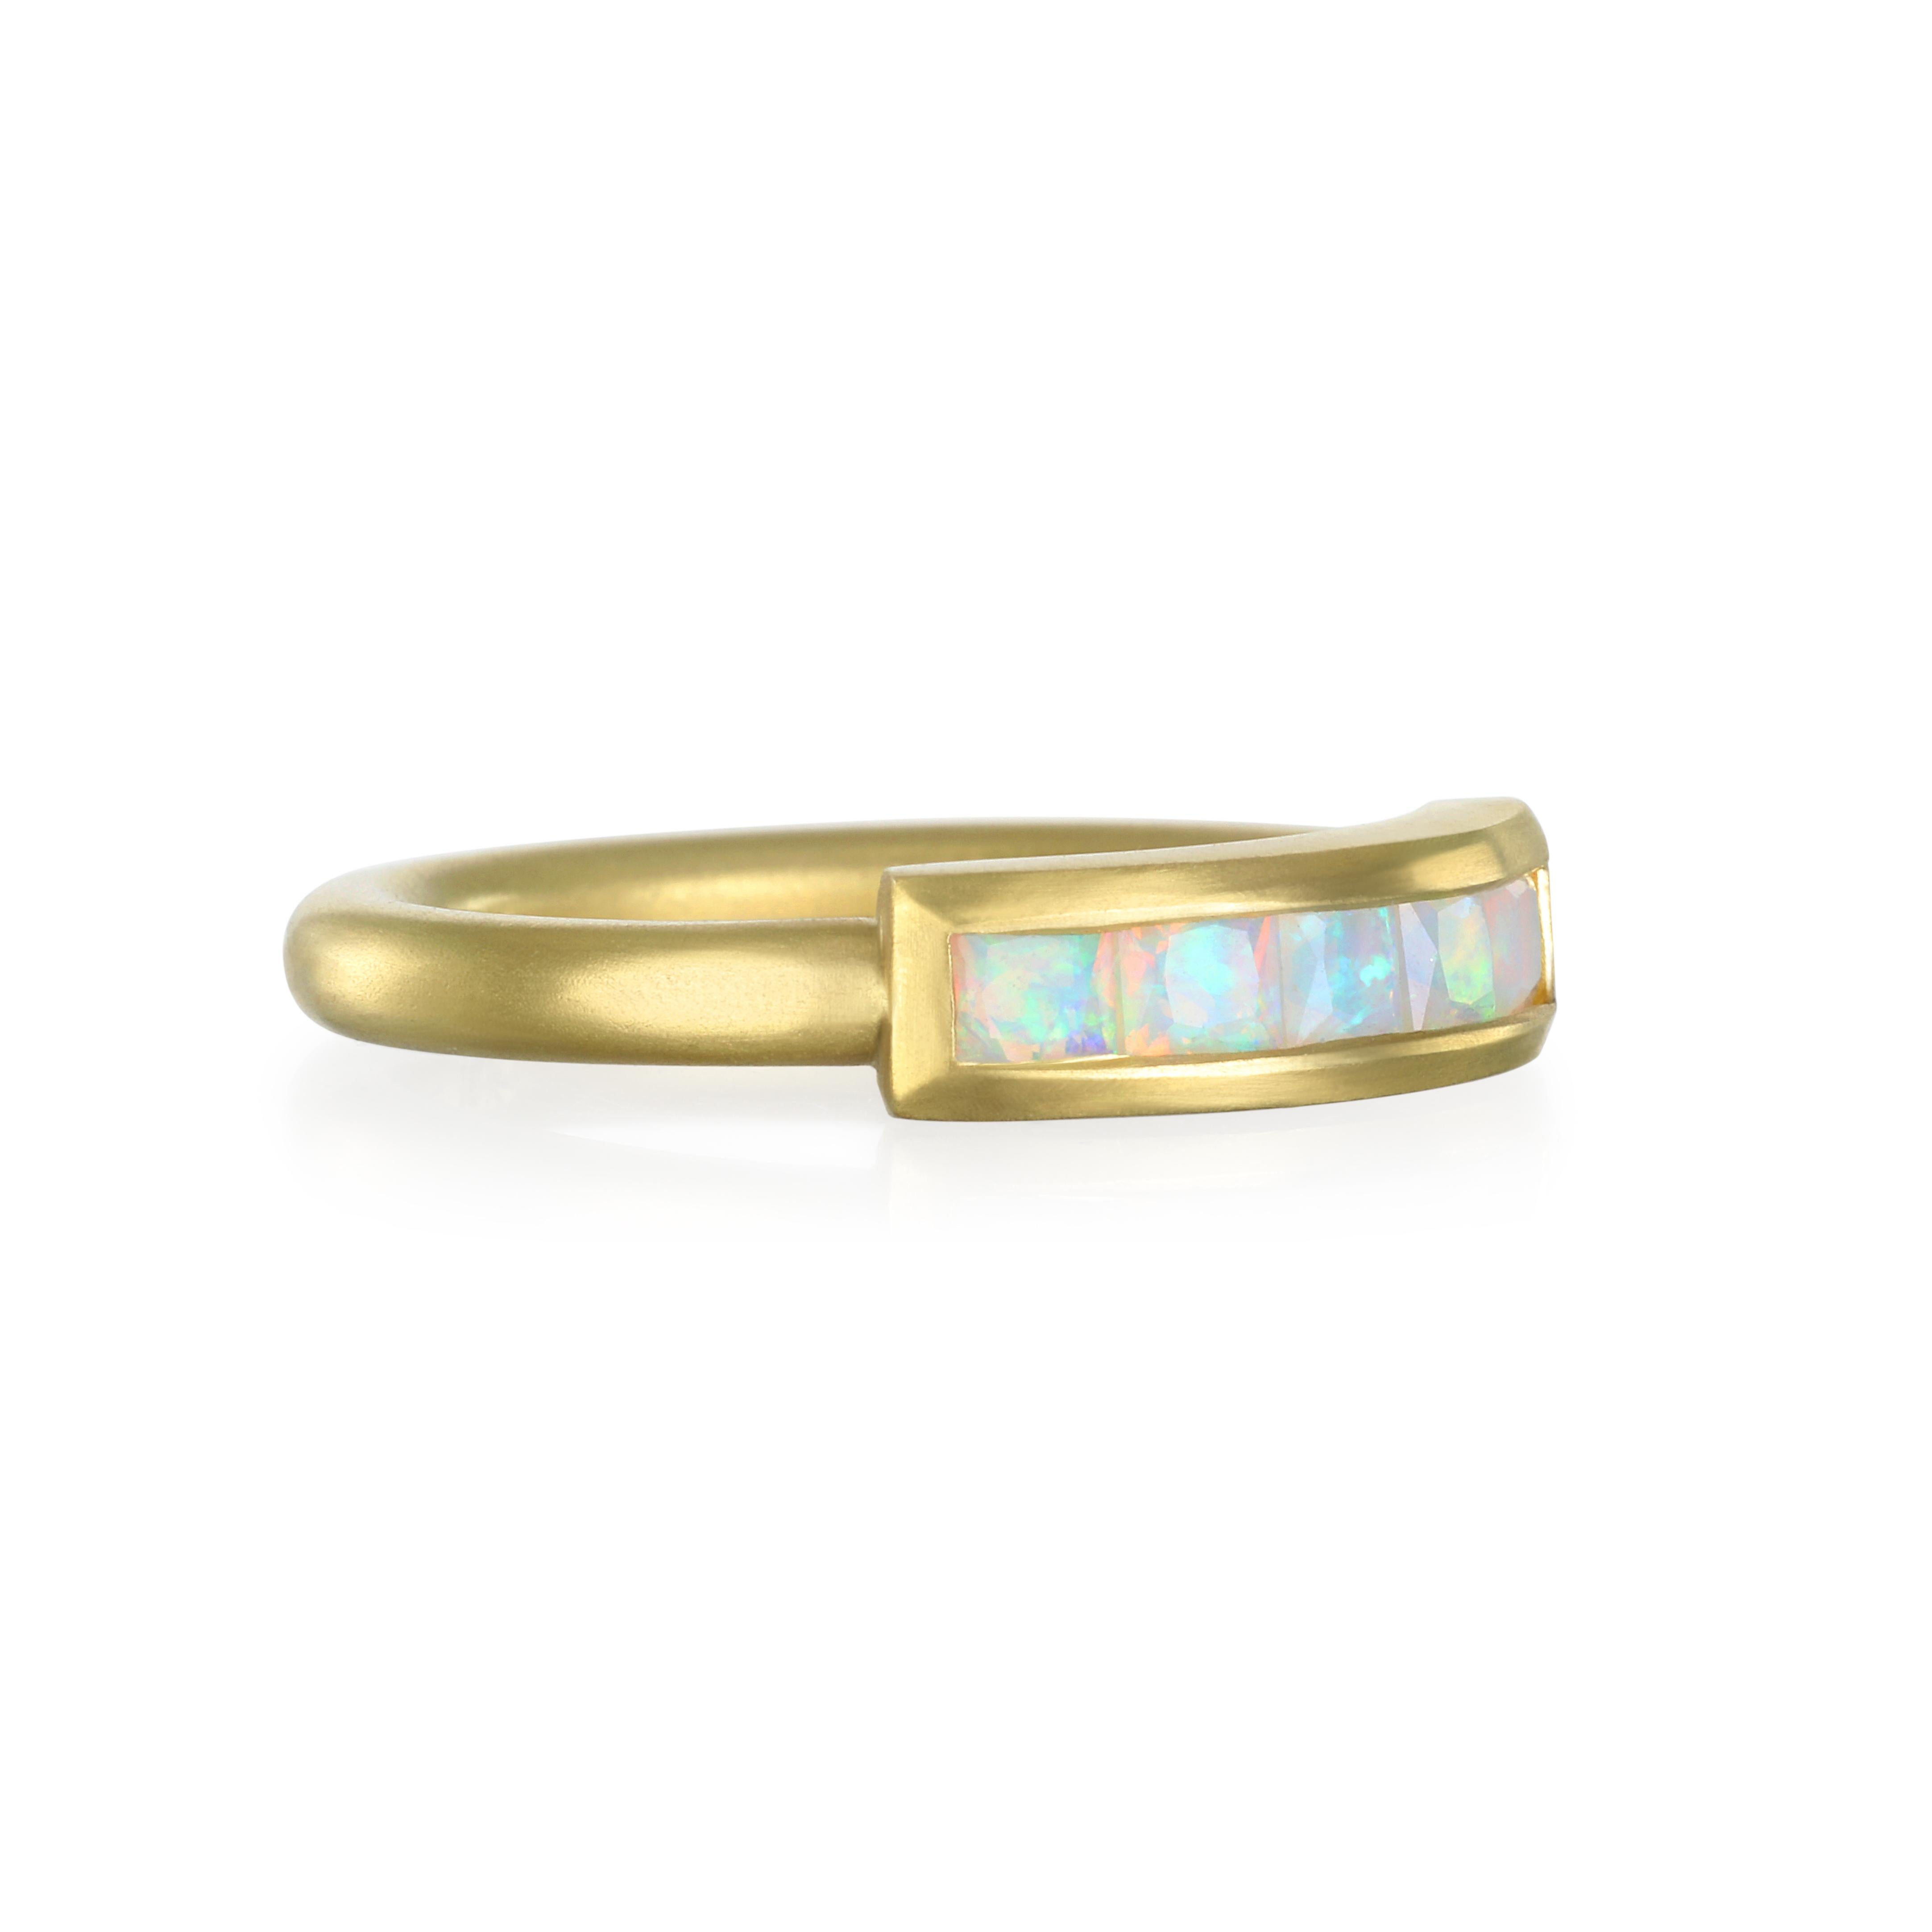 Faye Kim's 18 Karat Gold Opal Channel-Set Bar Ring features a display of dazzling color mixed with brightness, shimmer, and just the right amount of sparkle. Channel set and matte finished, this piece can be worn alone or statcked with other rings